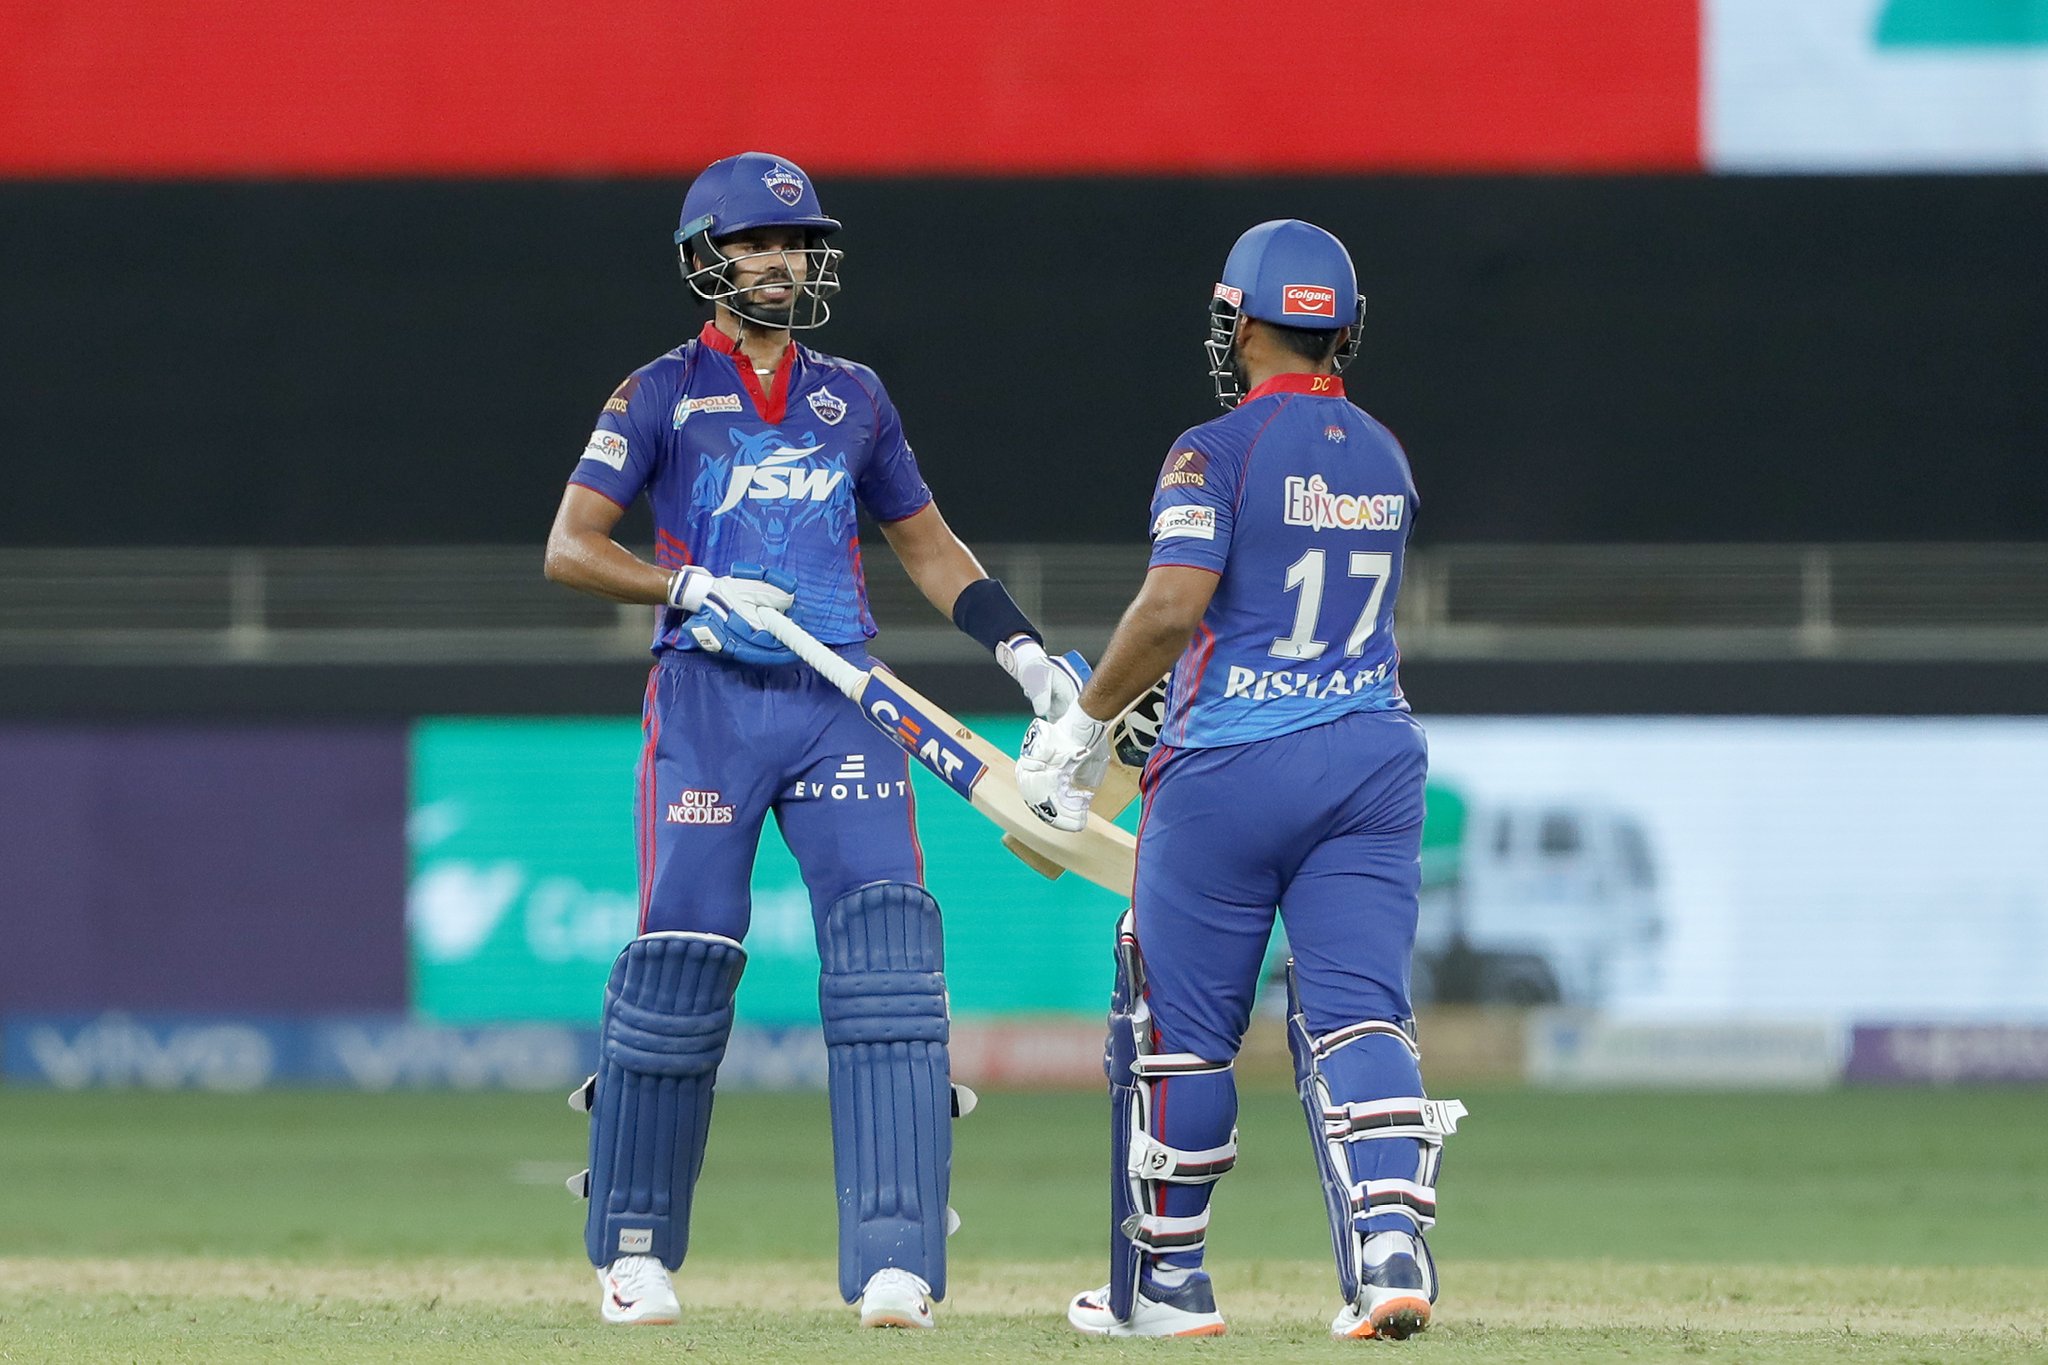 IPL 2021 | Kolkata Knight Riders vs Delhi Capitals - BONS preview, head to head, where to watch, and betting tips